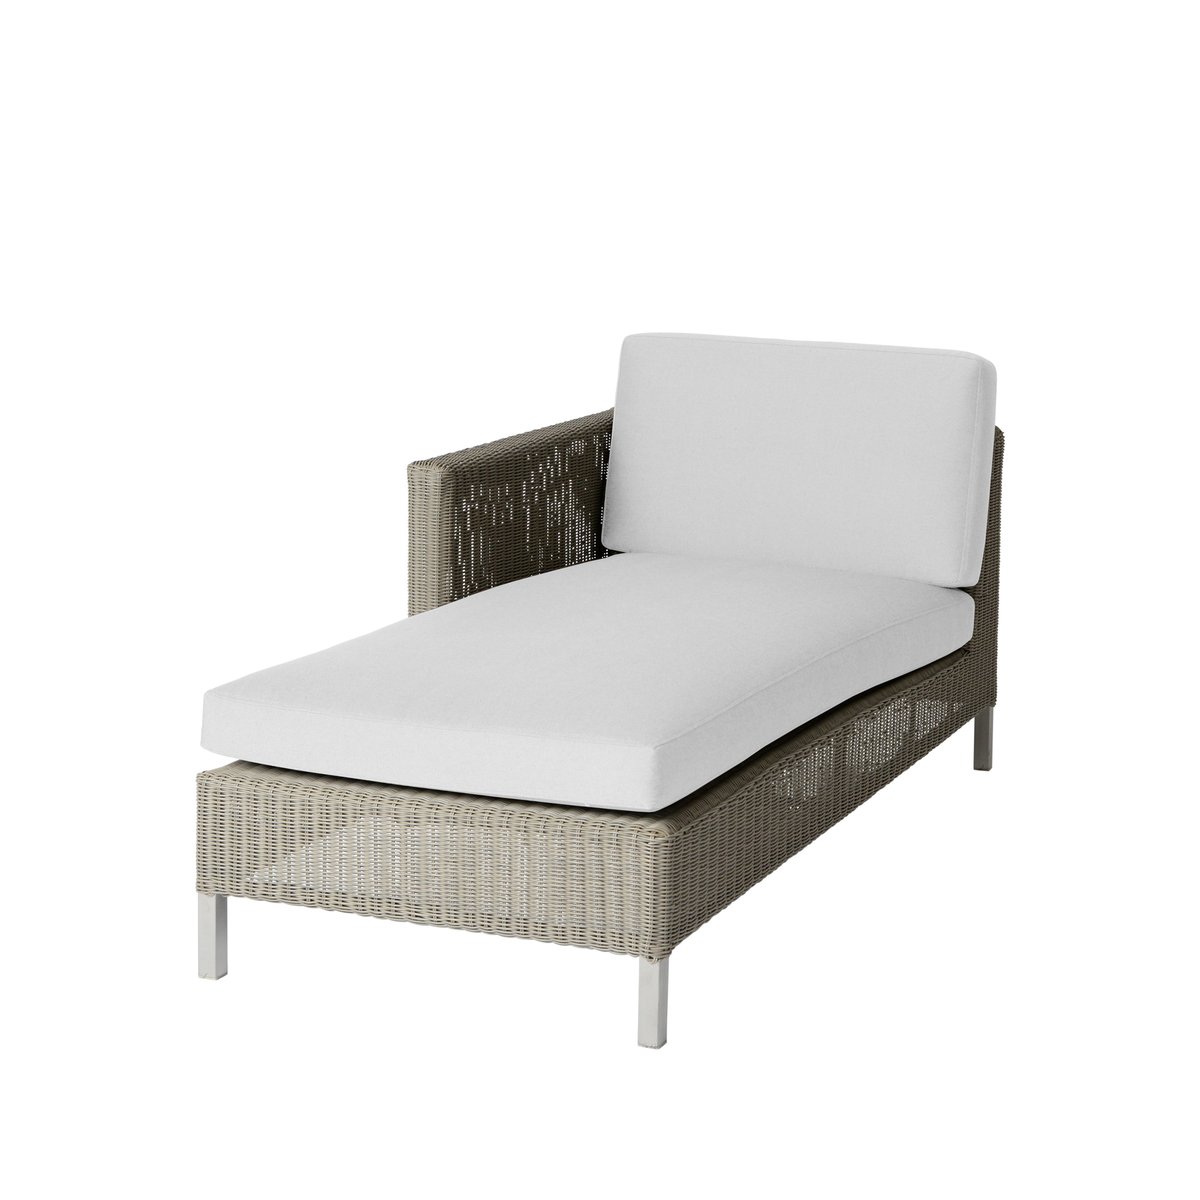 Cane-line Connect chaise longue Taupe, witte kussens